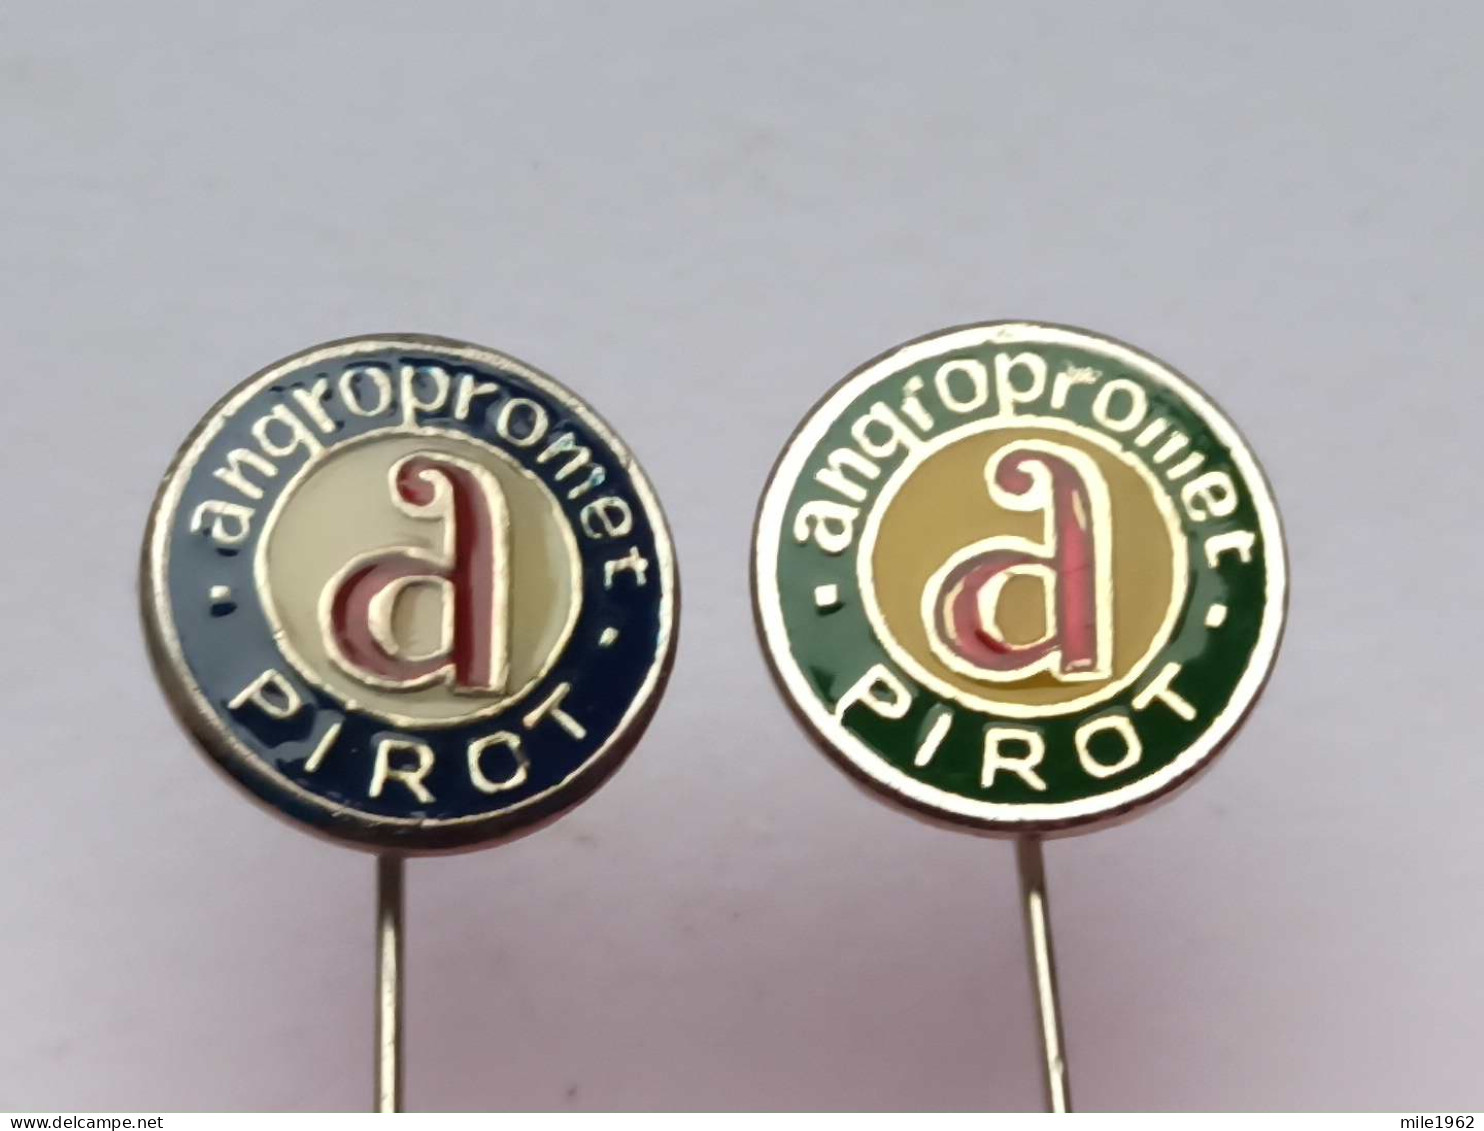 BADGE Z-98-16 - 2 PINS - ANGROPROMET PIROT SERBIA, AGRICULTURAL Agriculture Agricole - Lots